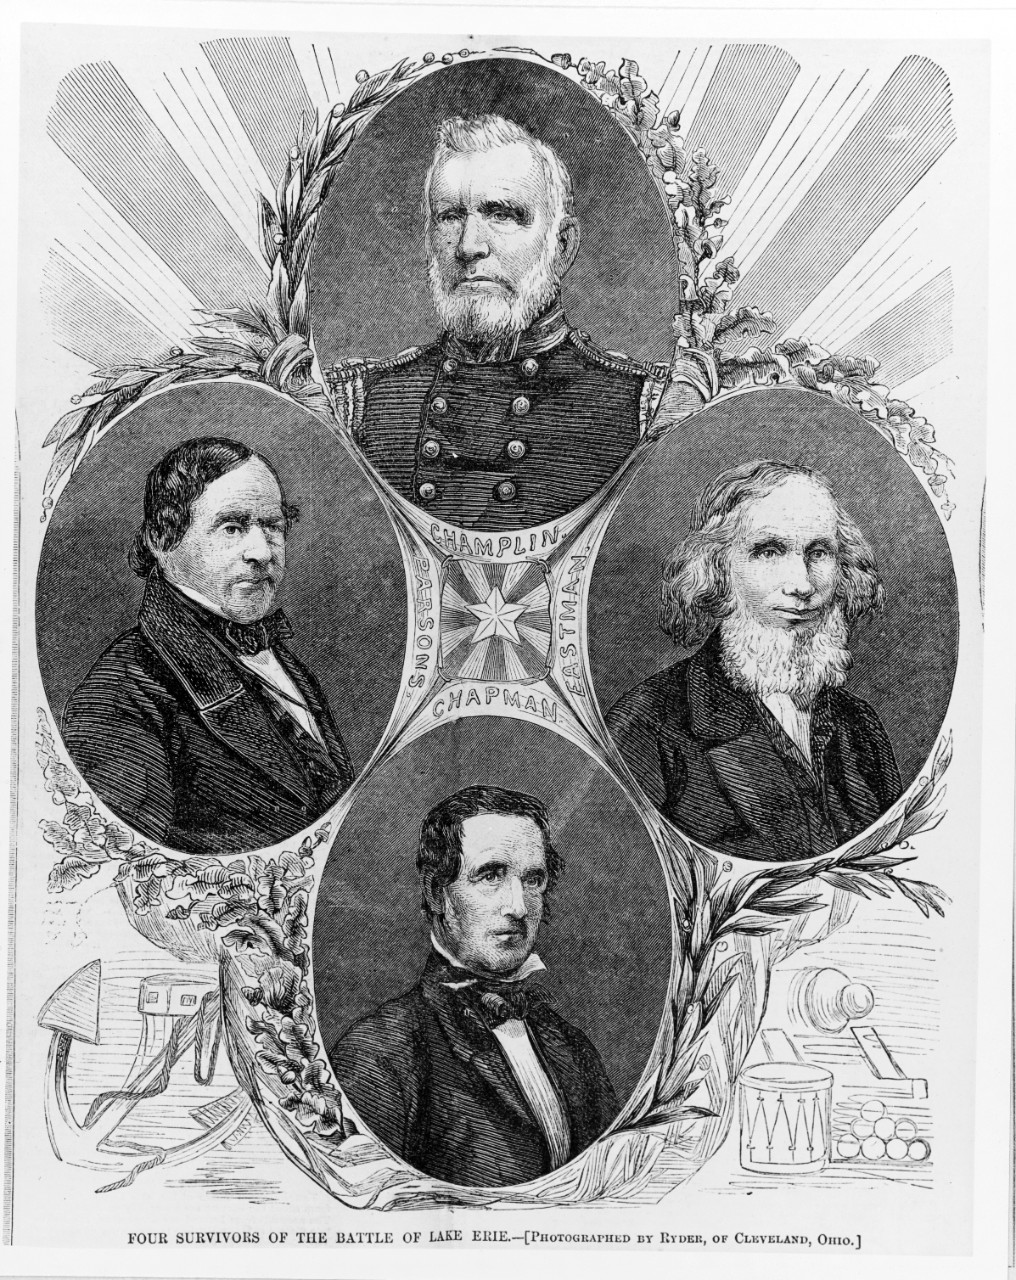 Four survivors of the Battle of Lake Erie